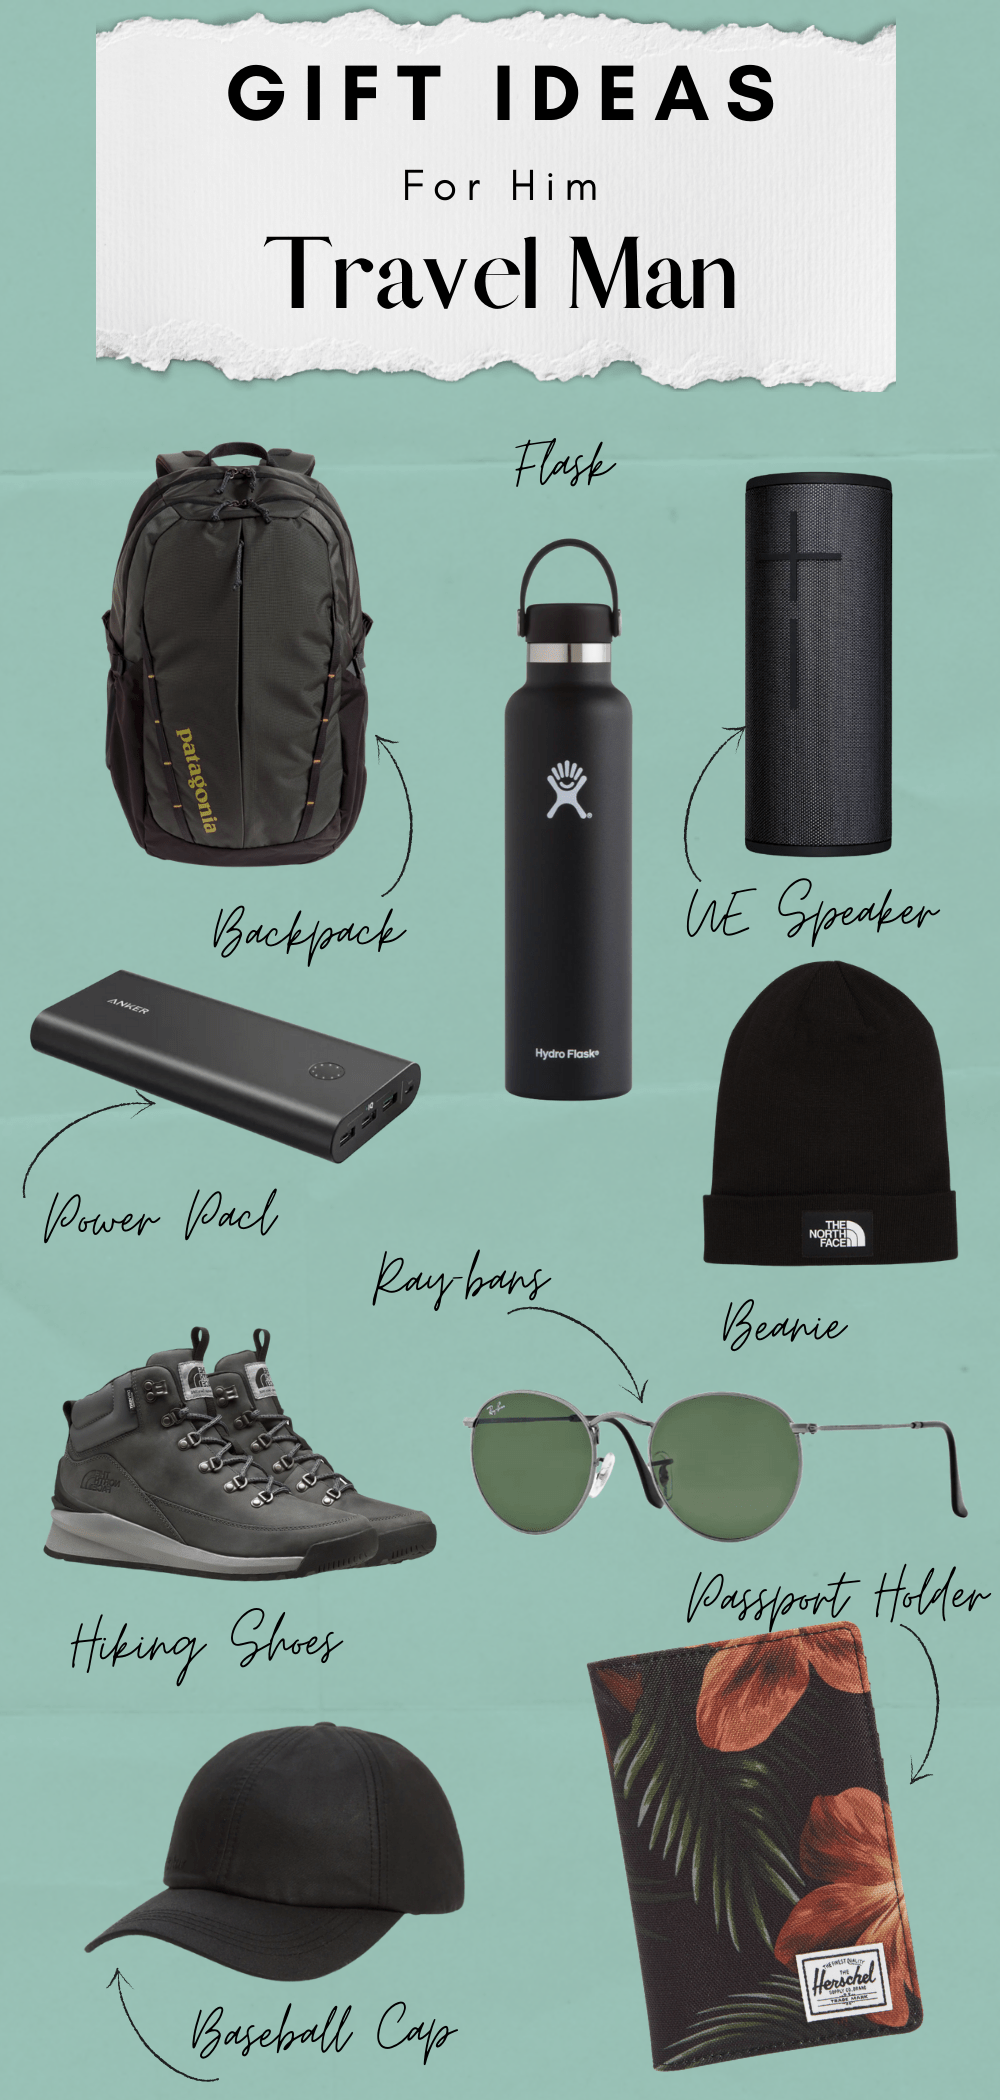 Gift Ideas for him Travel Man